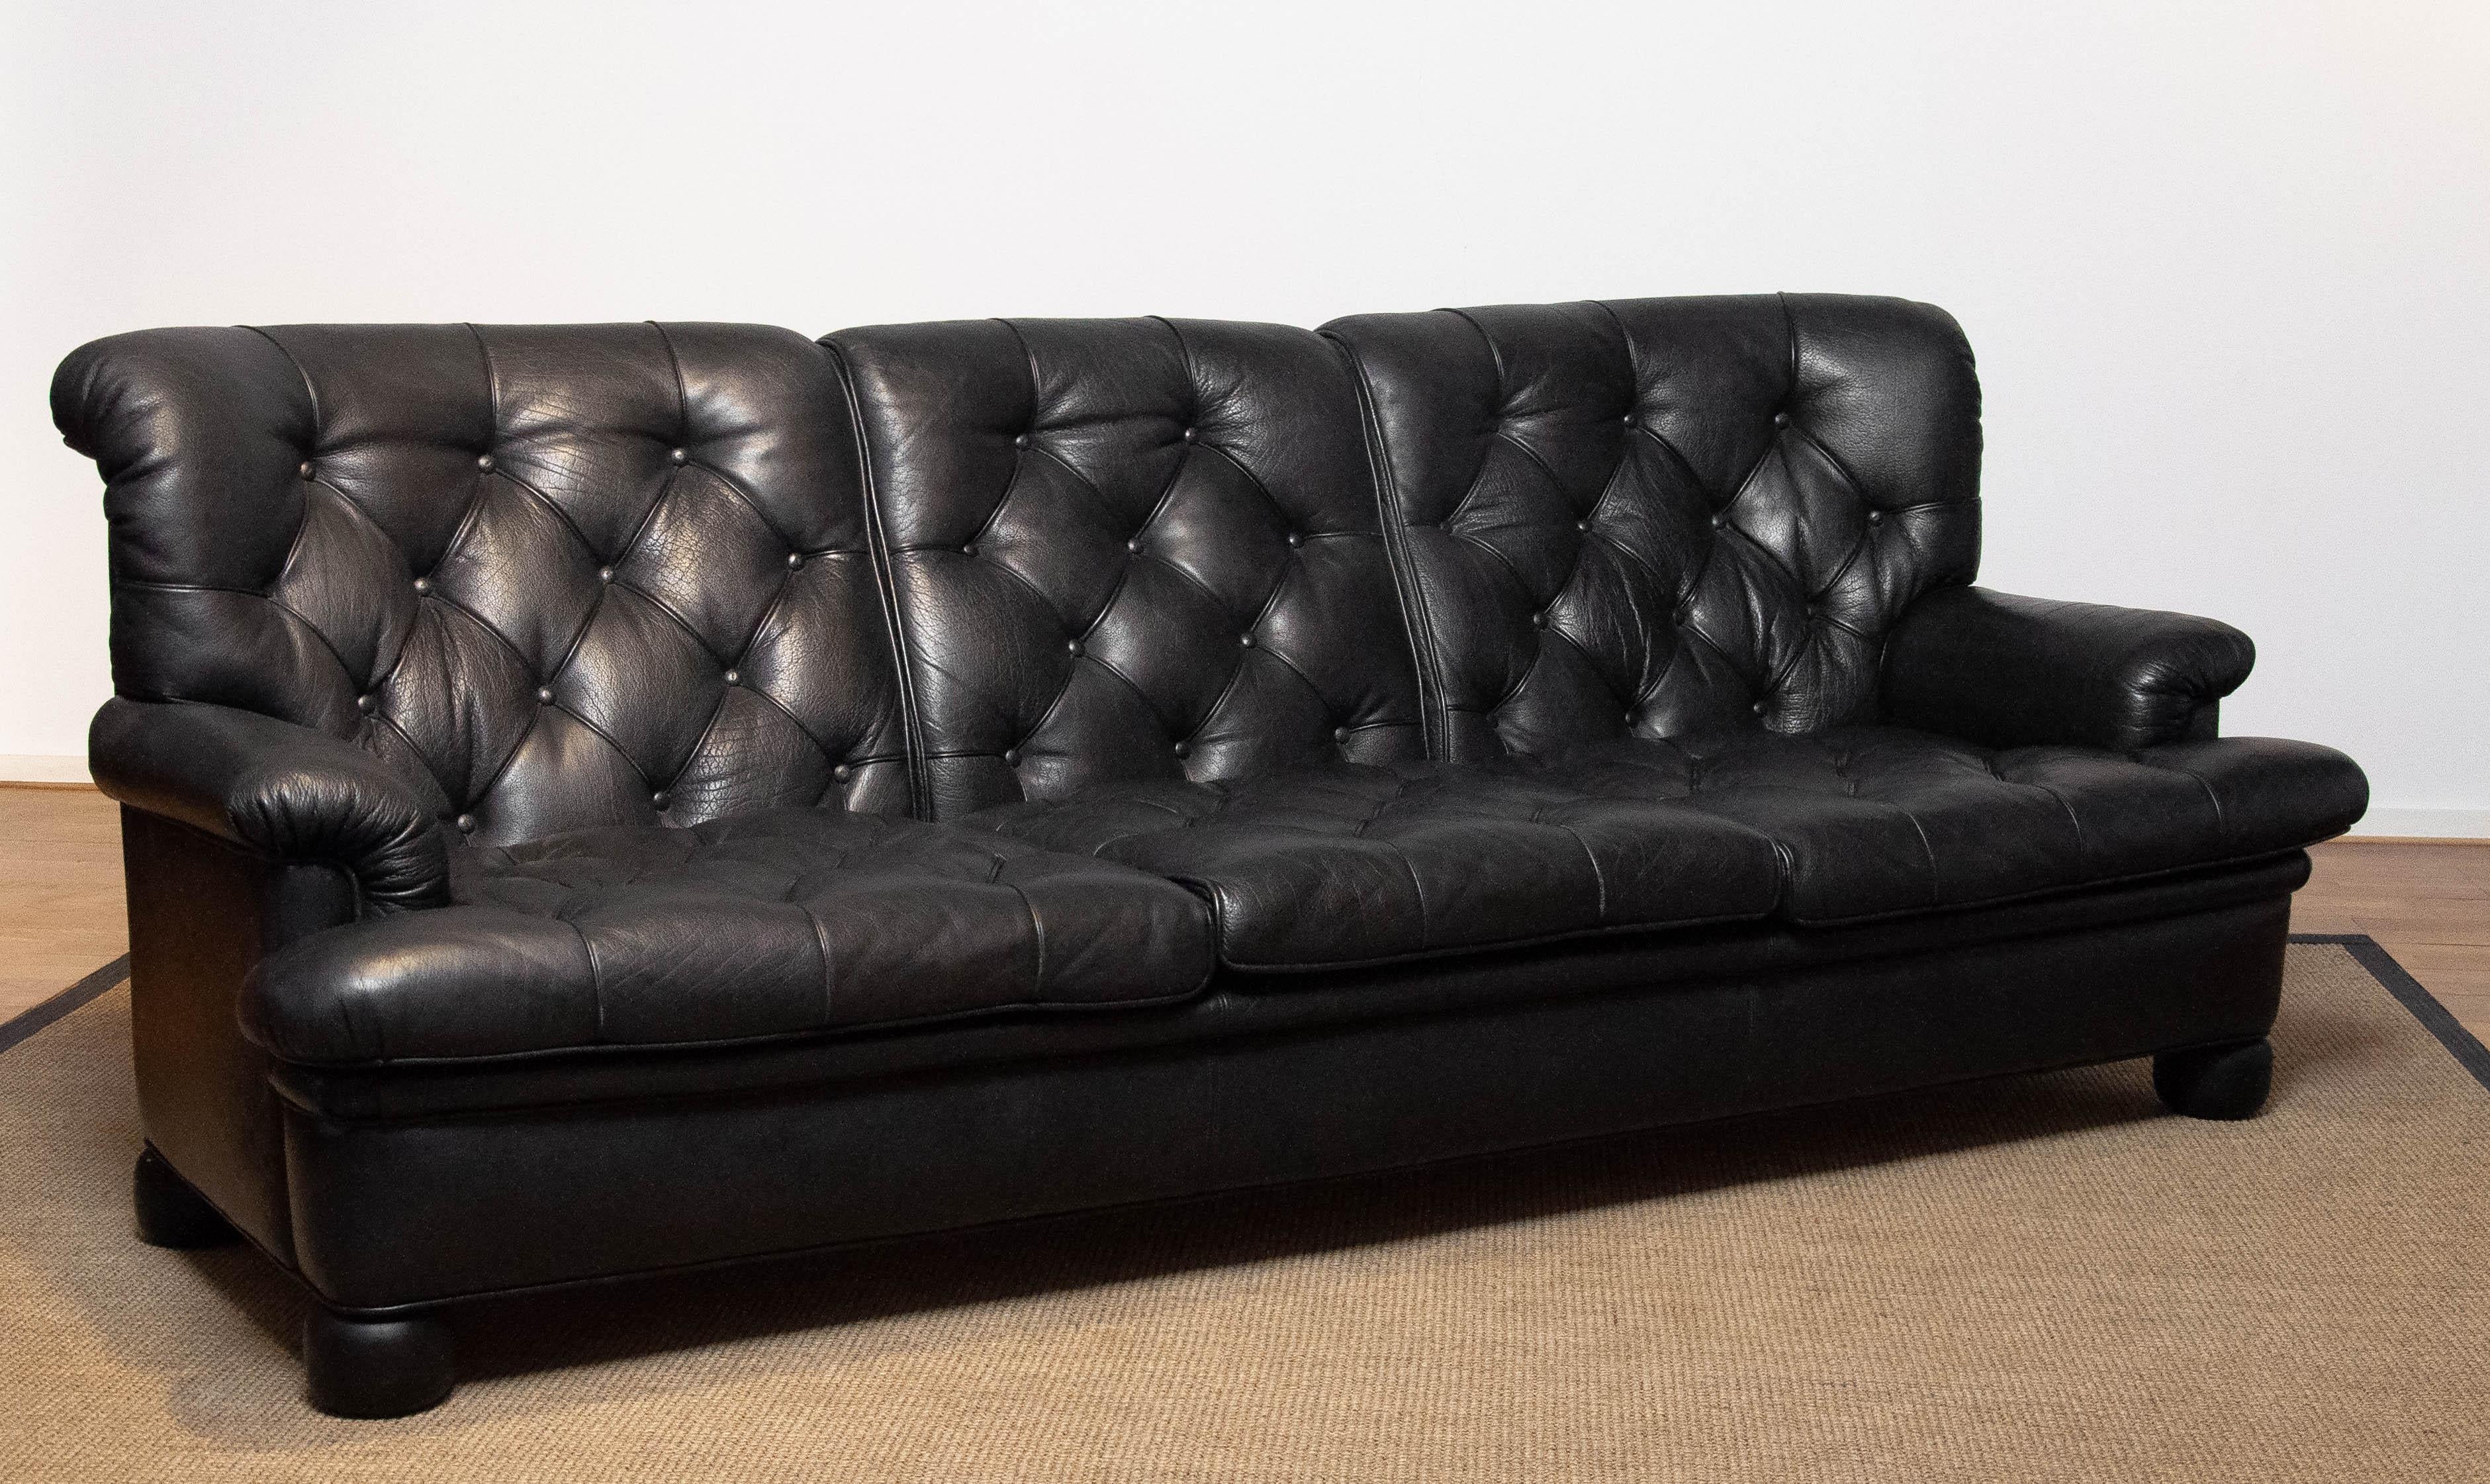 1960 Black Leather Chesterfield Model 'Jupiter' Three Seater Sofa by Arne Norell For Sale 2